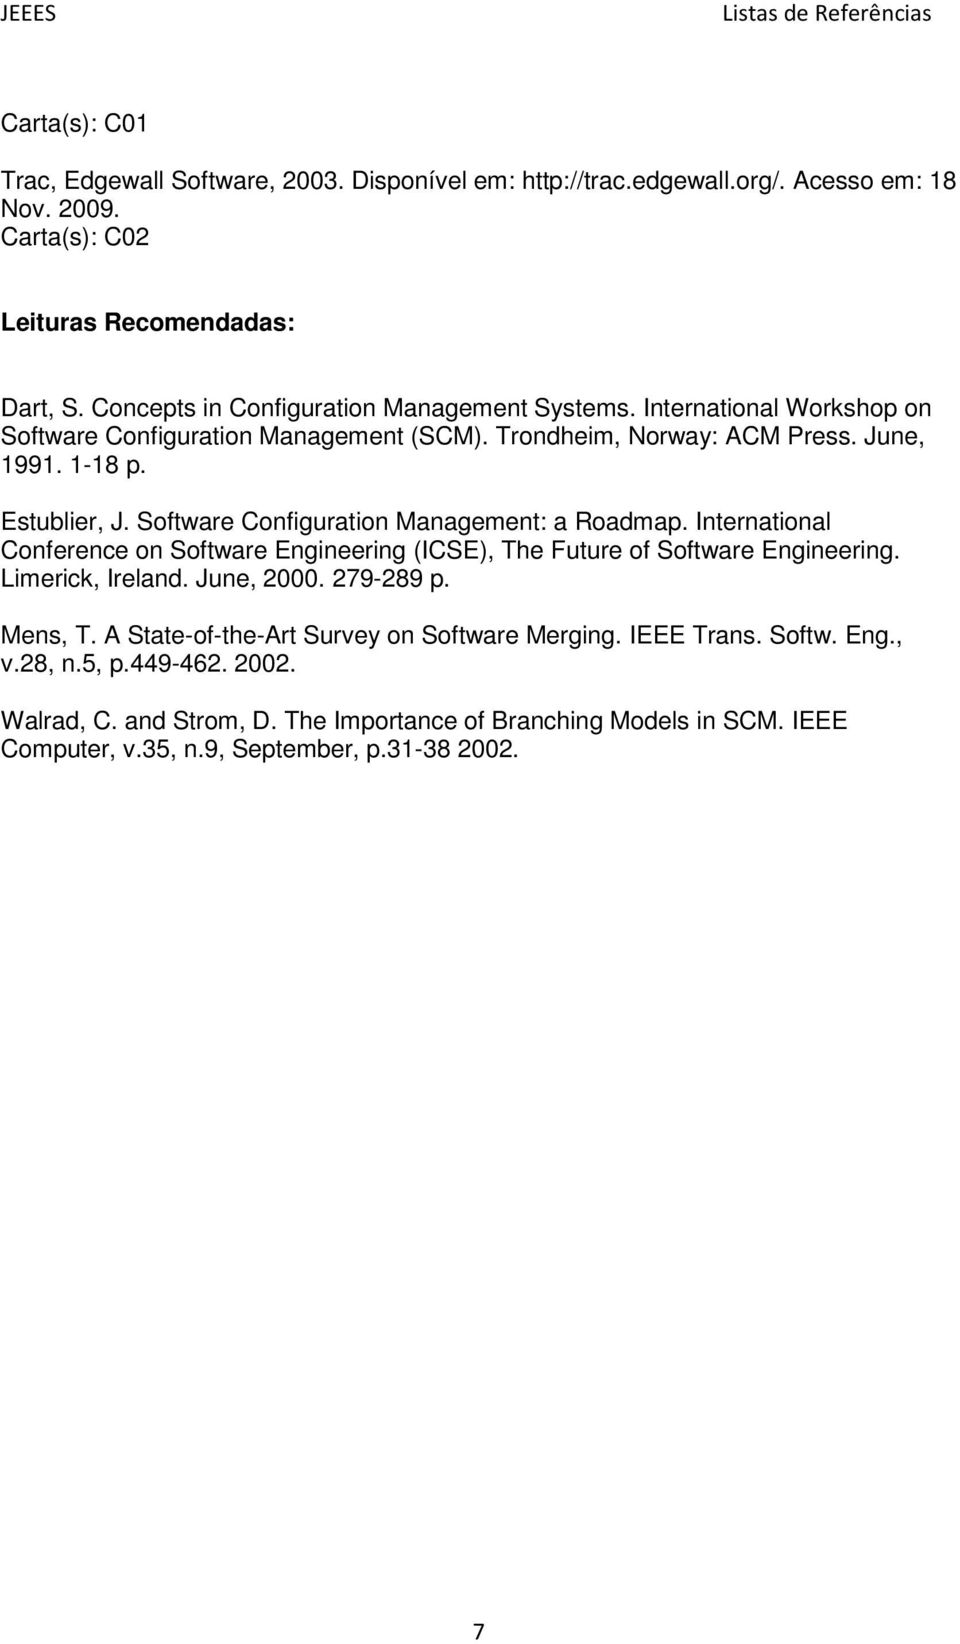 Software Configuration Management: a Roadmap. International Conference on Software Engineering (ICSE), The Future of Software Engineering. Limerick, Ireland. June, 2000. 279-289 p. Mens, T.